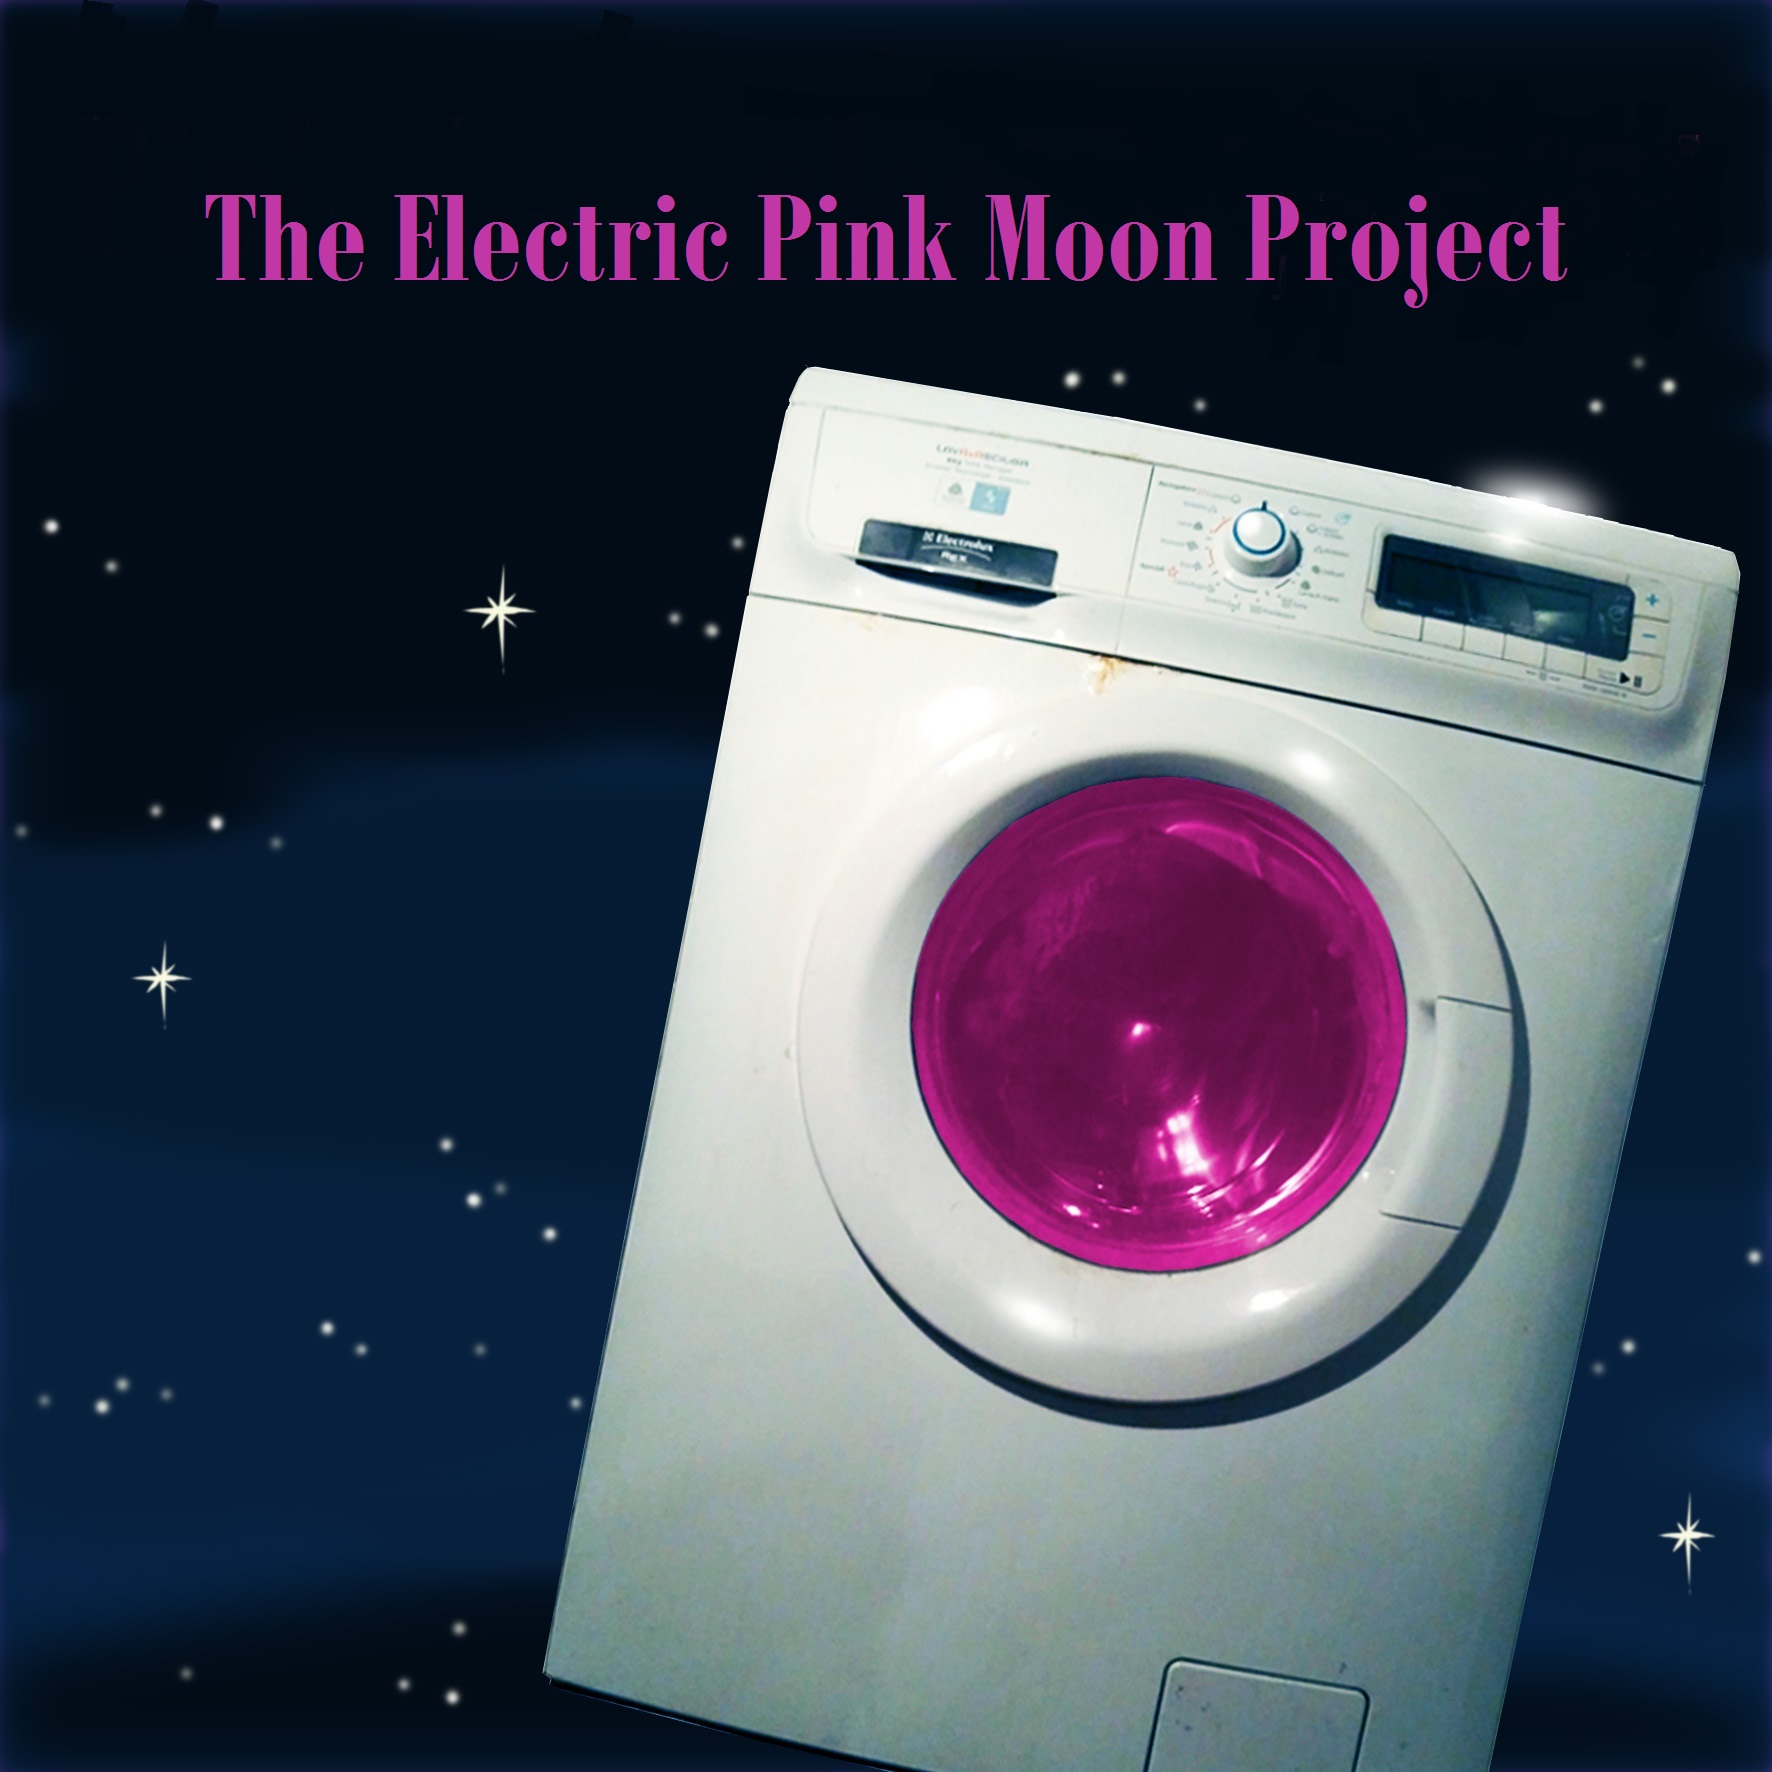 The Electric Pink Moon Project